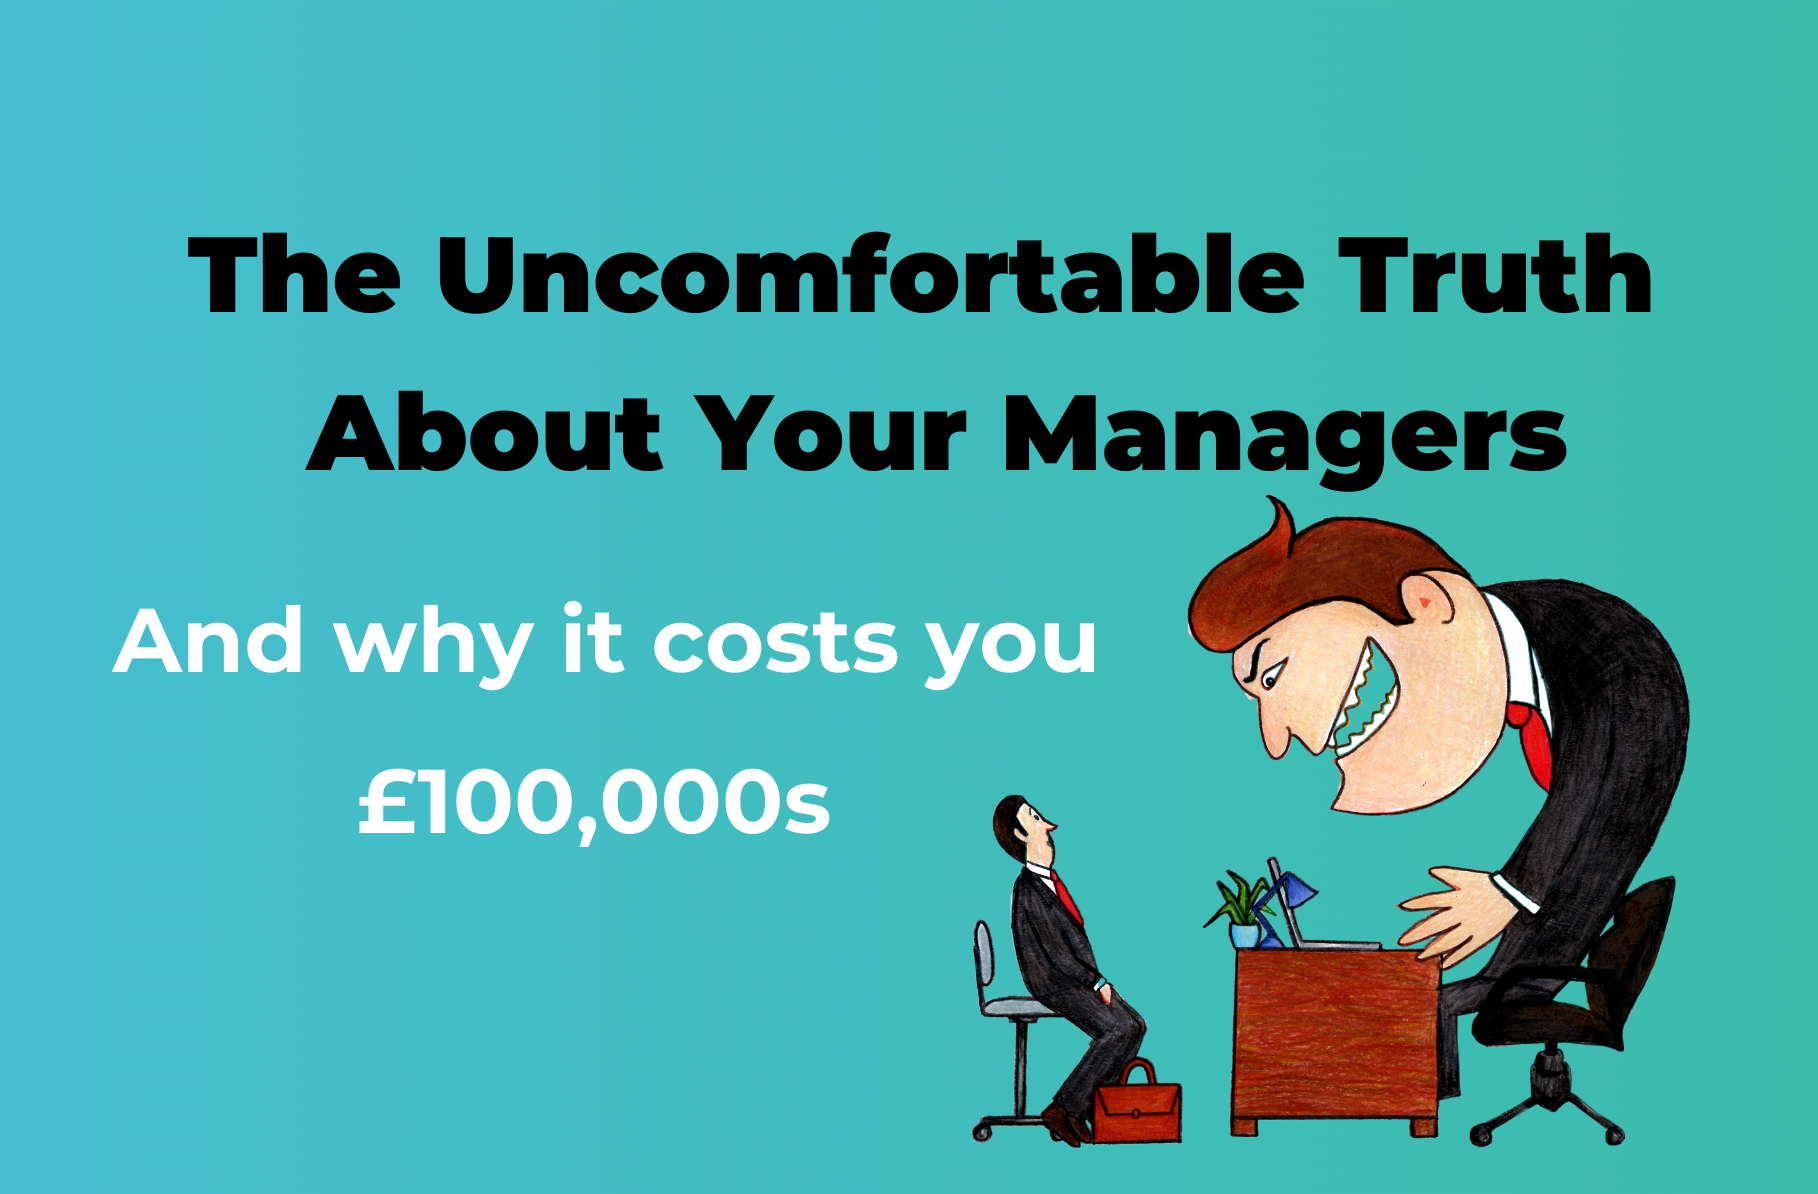 The Uncomfortable Truth About Your Managers - and Why it Costs You £100,000s.